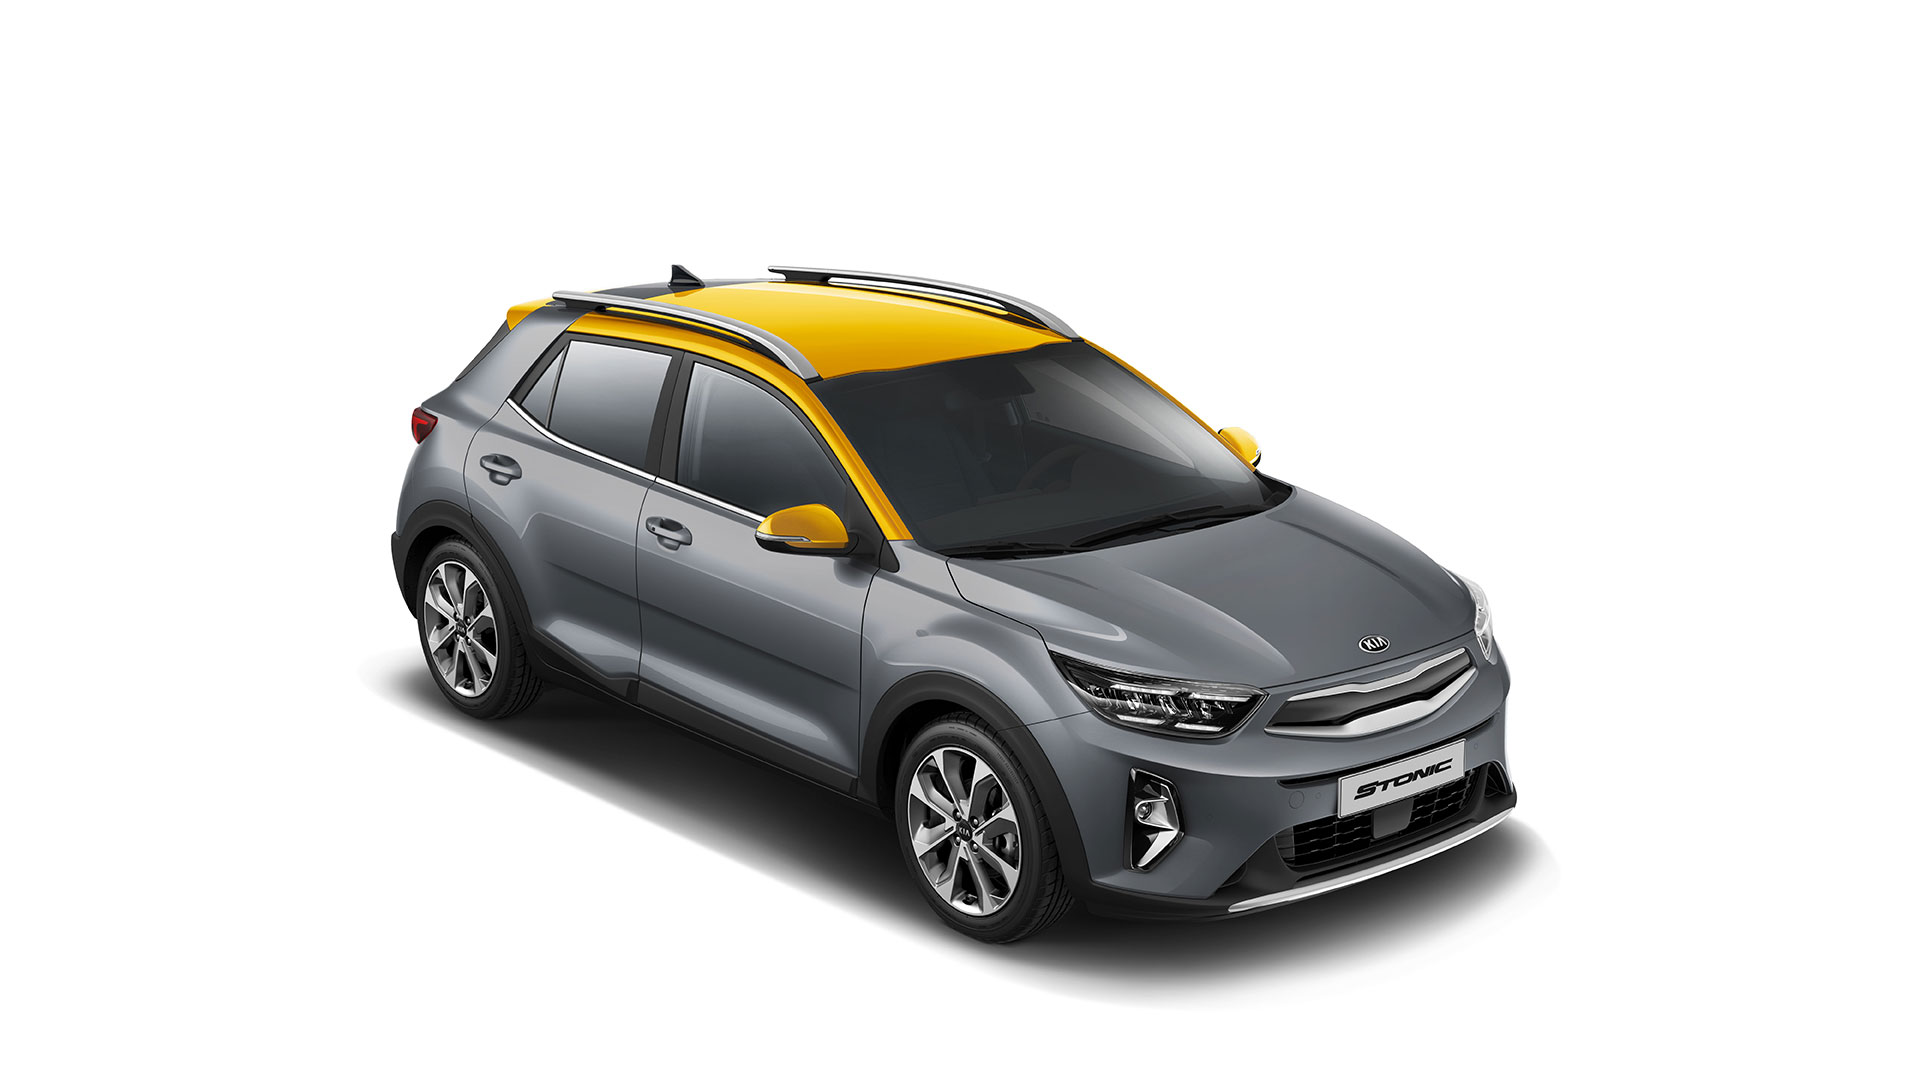 https://s1.cdn.autoevolution.com/images/news/2020-kia-stonic-is-ecodynamics-in-europe-also-better-connected-and-assisted-146955_1.jpg